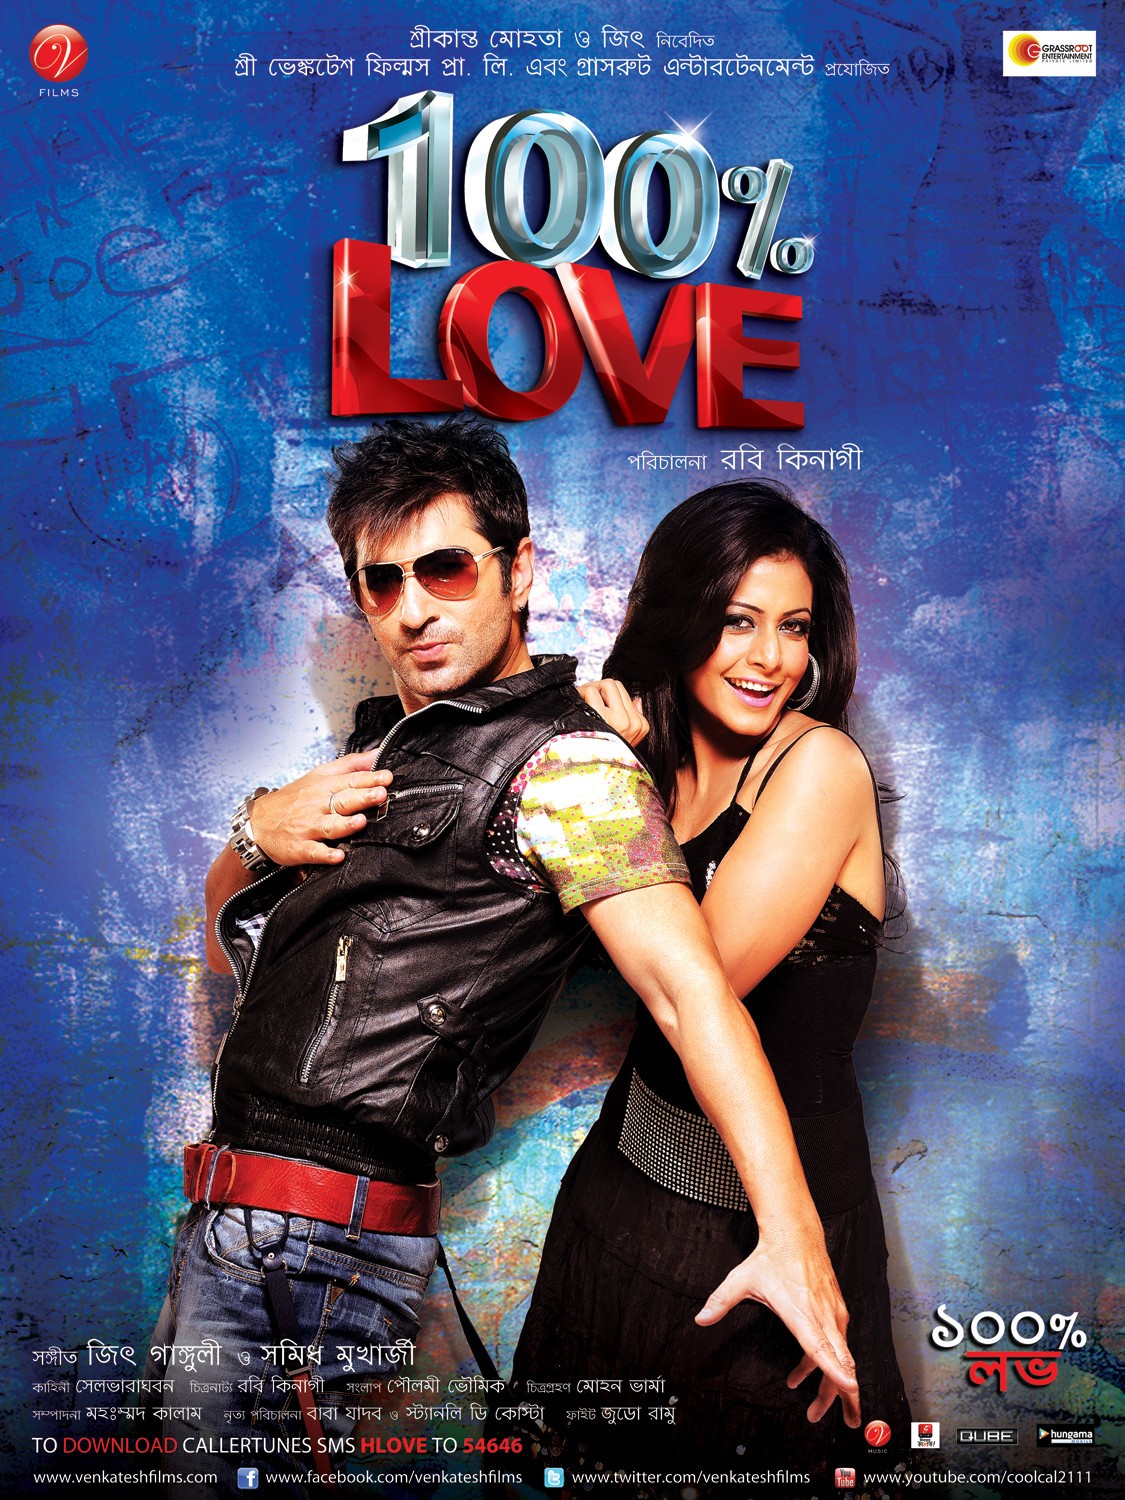 Extra Large Movie Poster Image for 100% Love (#9 of 13)